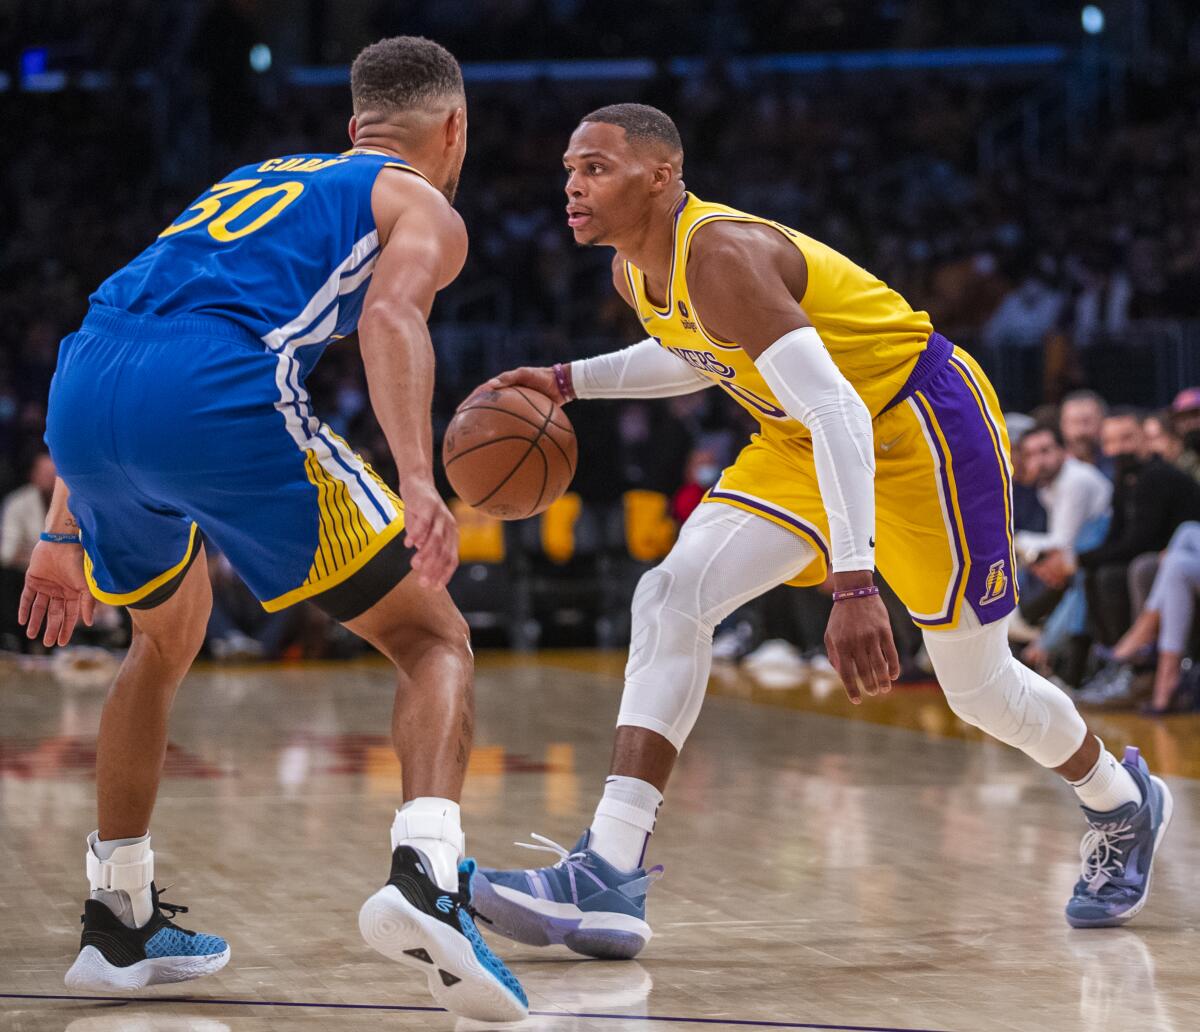 Lakers guard Russell Westbrook controls the ball in front of Warriors guard Stephen Curry.